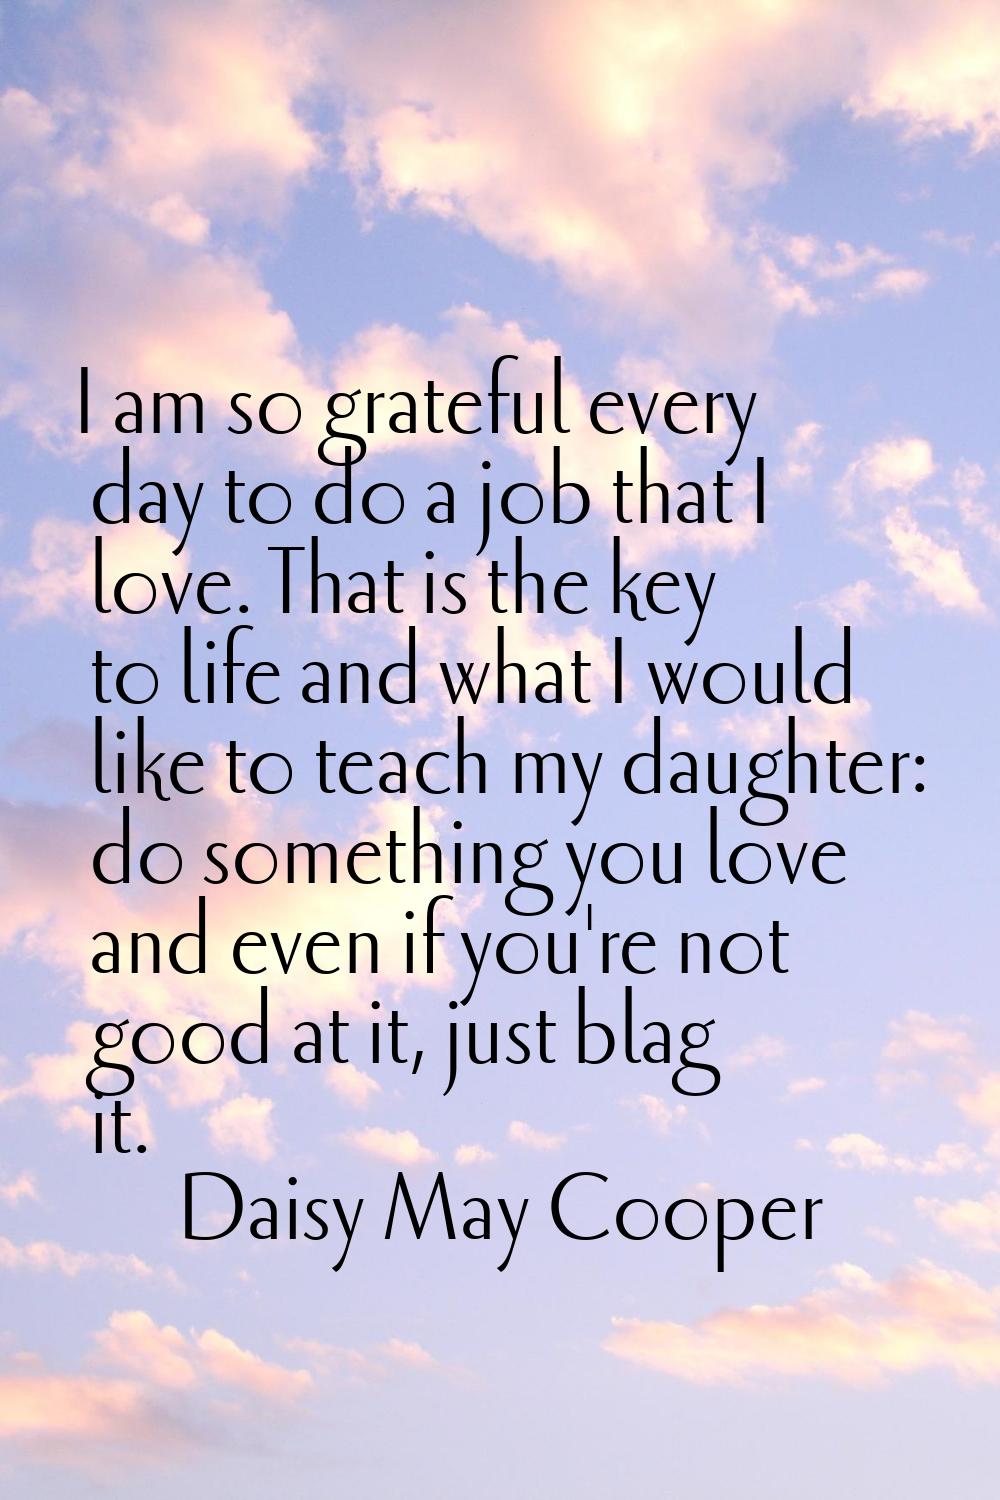 I am so grateful every day to do a job that I love. That is the key to life and what I would like t